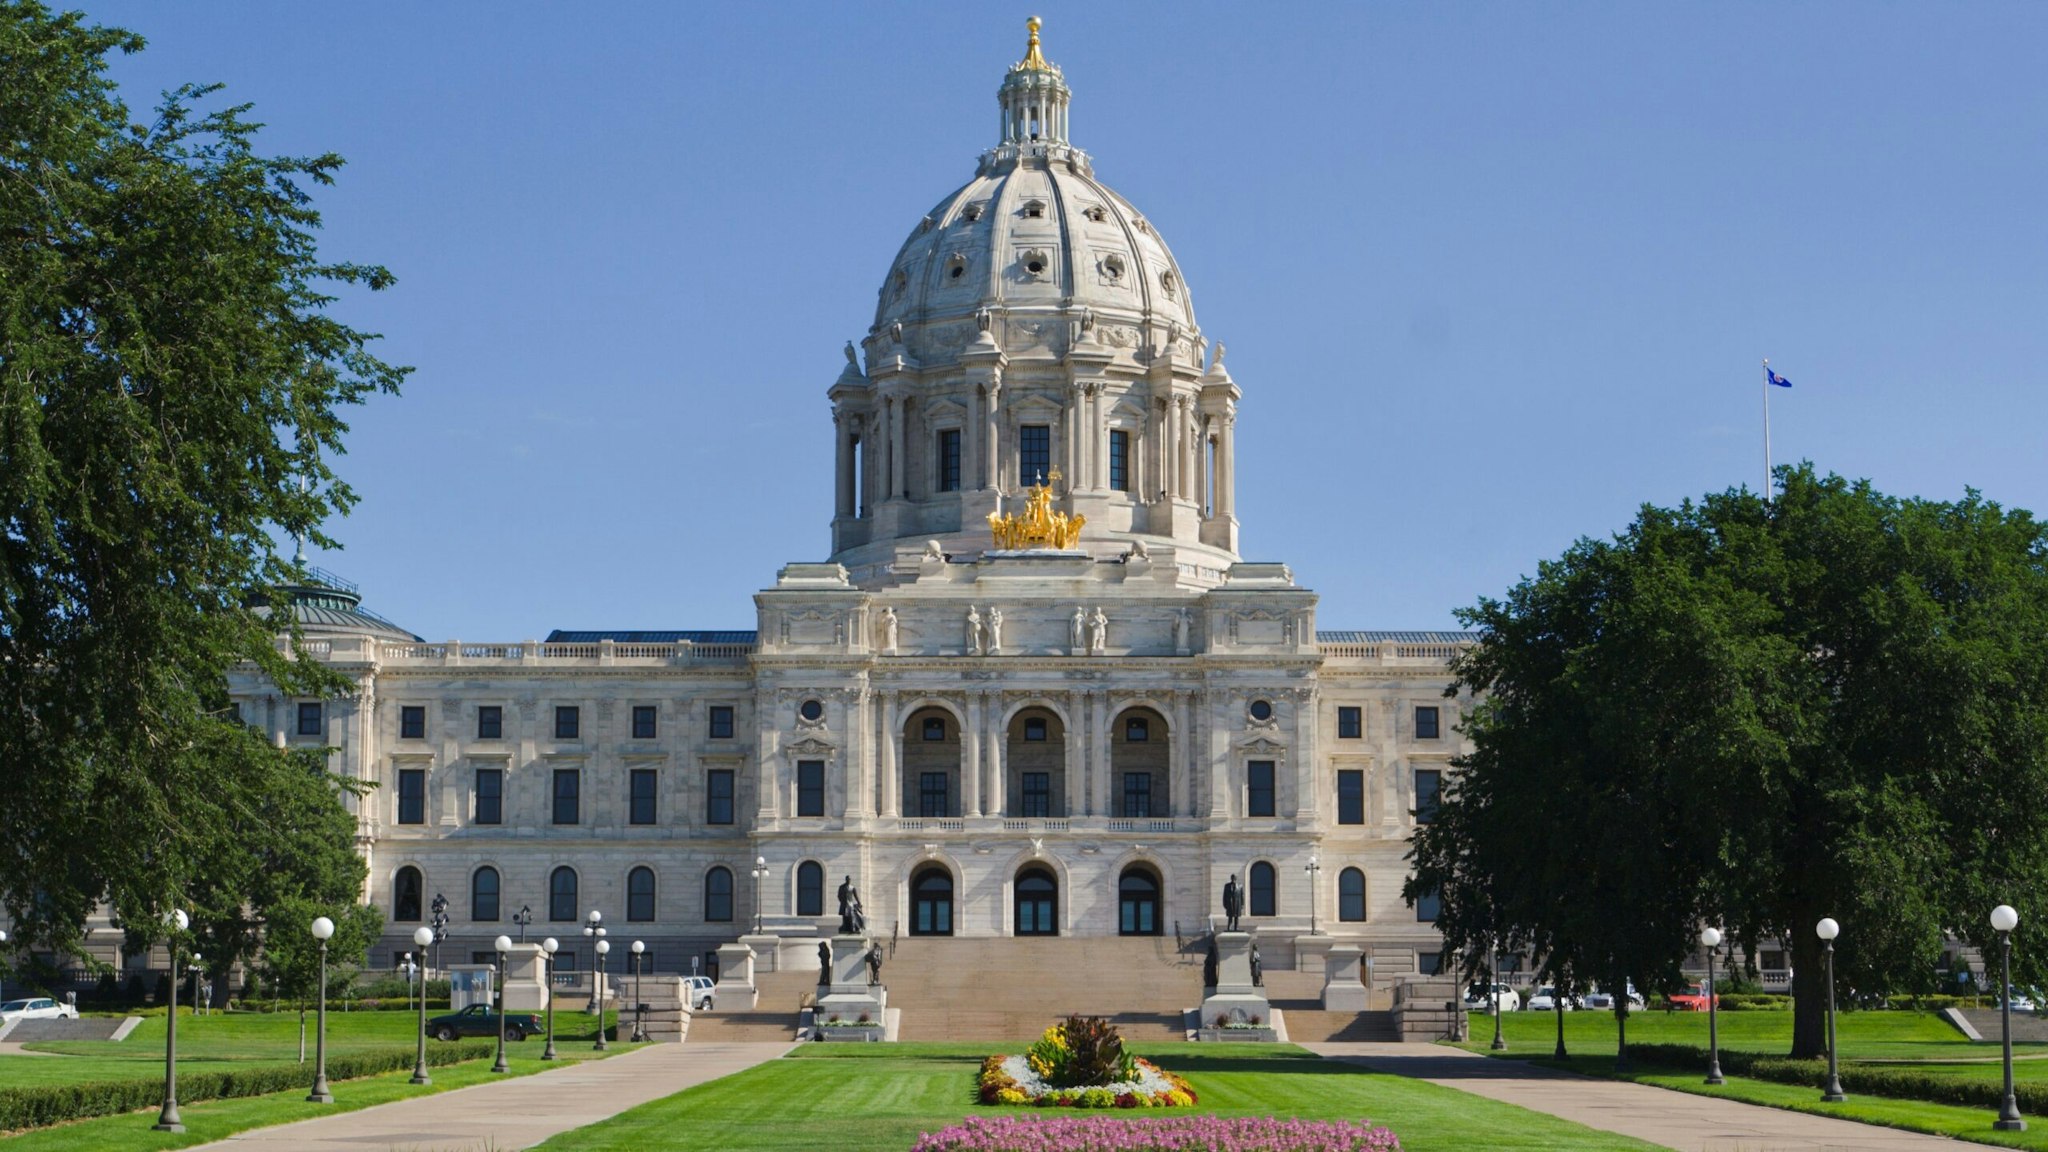 Front entrance approach of the Minnesota State Capitol building in St. Paul, Minnesota, USA, a facility for government legislation.